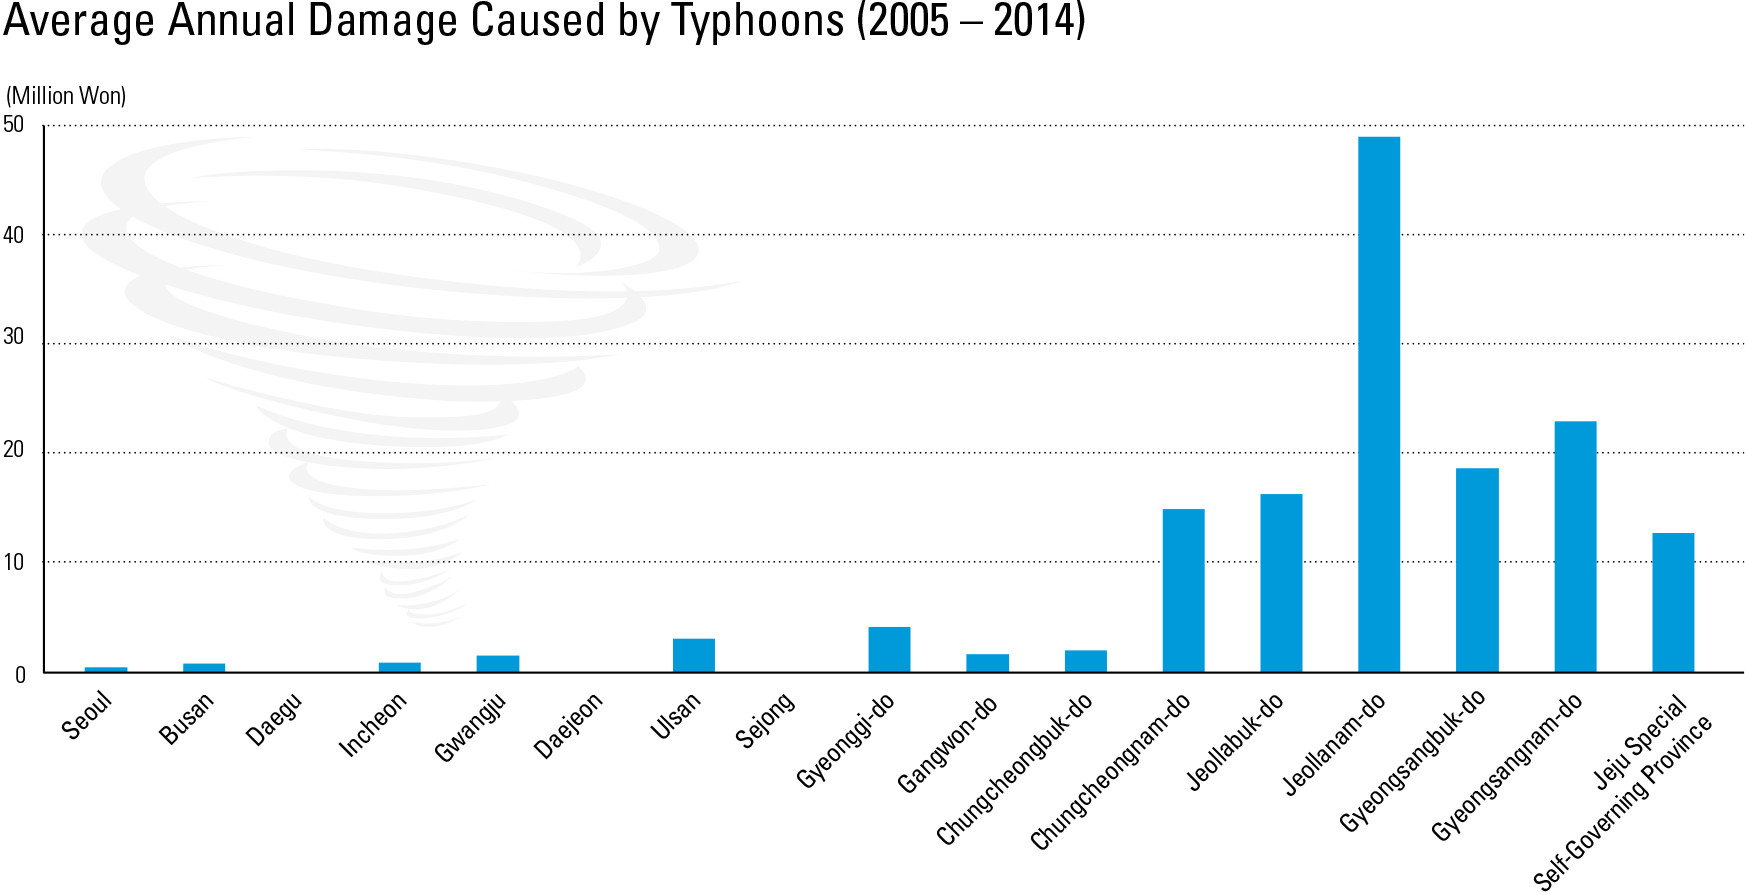 Average Annual Damages Caused by Typhoons (2005 – 2014)<p class="oz_zoom" zimg="http://imagedata.cafe24.com/us_2/us2_206-2_2.jpg"><span style="font-family:Nanum Myeongjo;"><span style="font-size:18px;"><span class="label label-danger">UPDATE DATA</span></span></p>